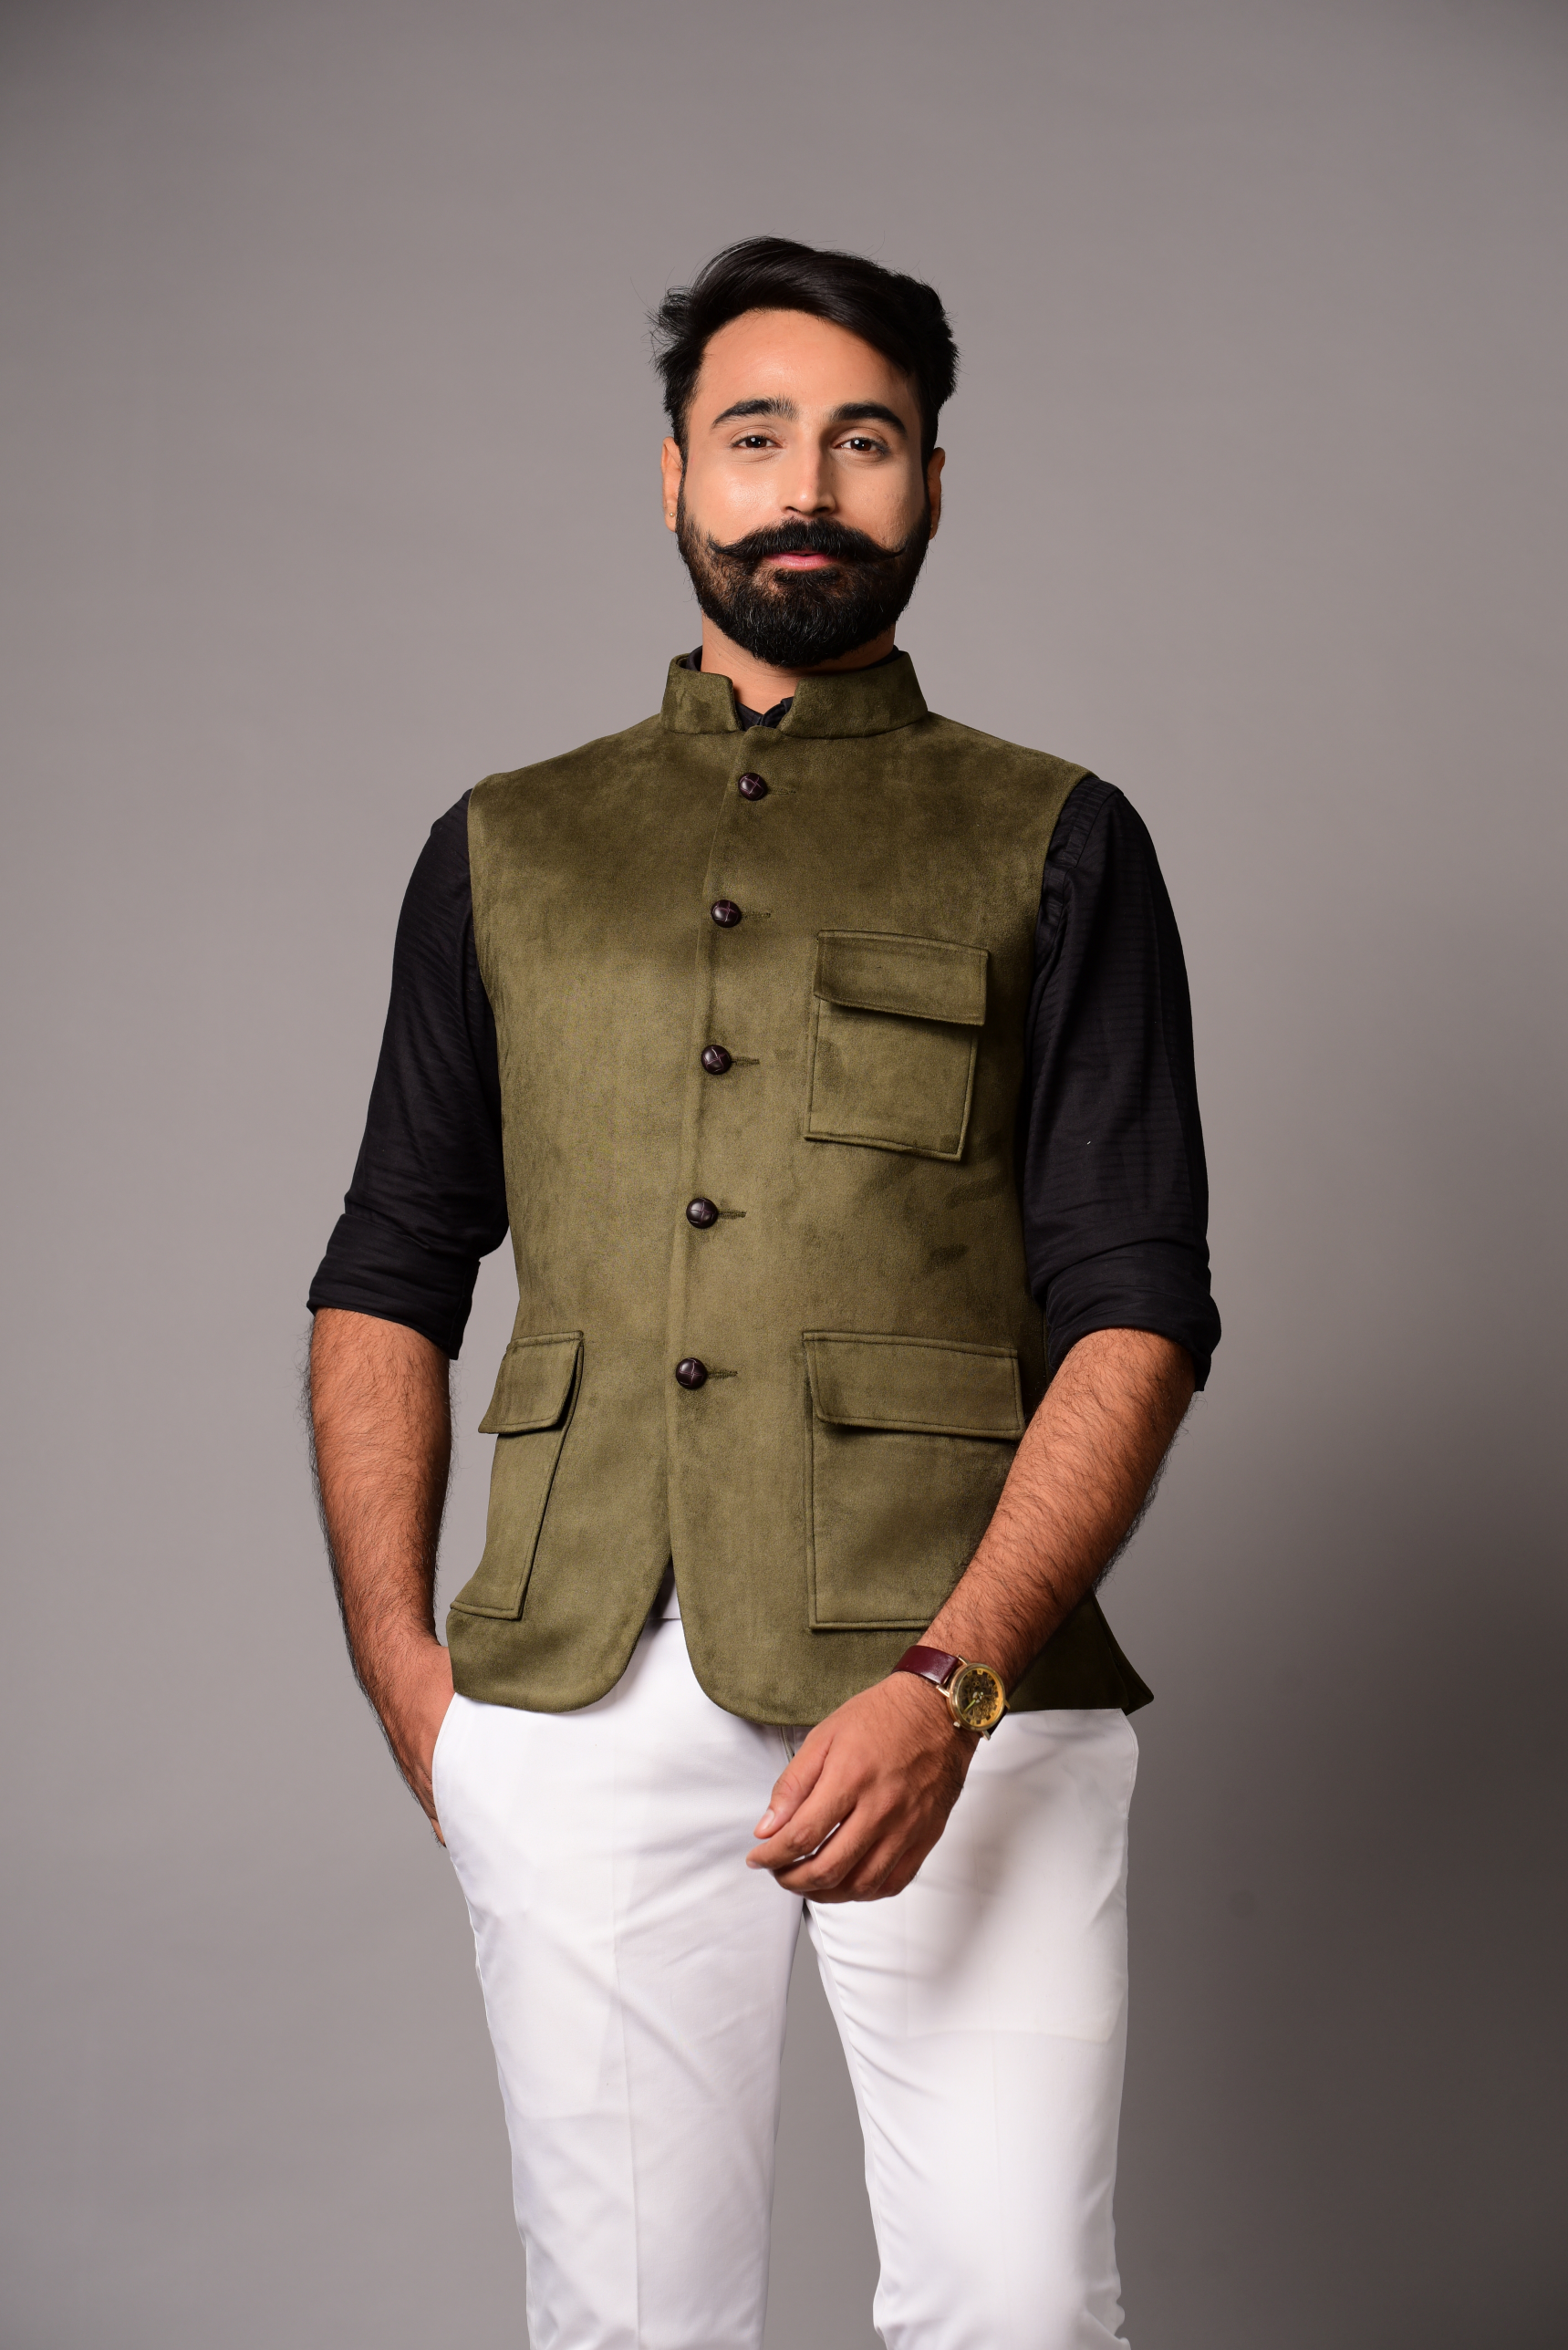 Elegant Olive Green 3 Pocket Hunting Style Faux Suede Leather Bandhgala Jodhpuri with White Trouser | Best for Cocktail, Sangeet Parties